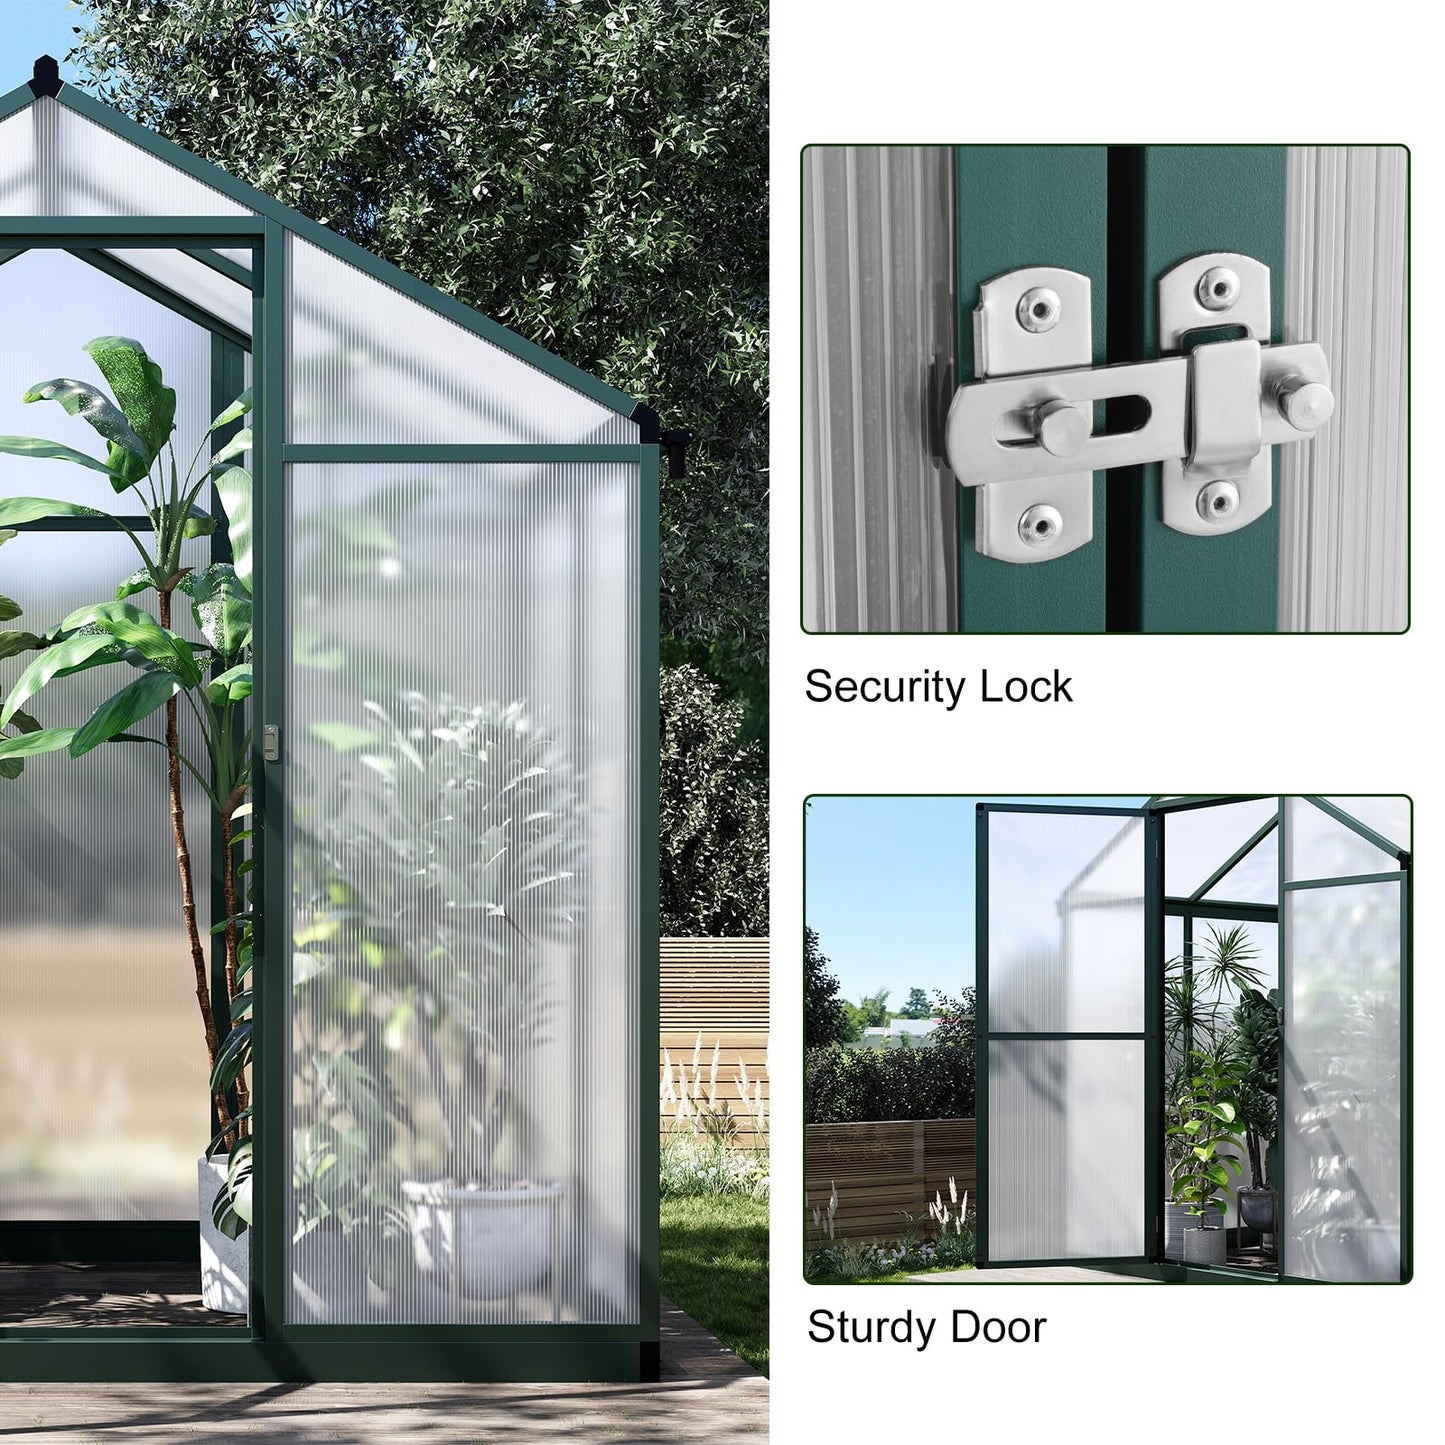 6x4 FT Greenhouse for Outdoors, Polycarbonate Greenhouse with Quick Setup Structure and Roof Vent, Aluminum Large Walk-in Greenhouse for Outside Garden Backyard, Green